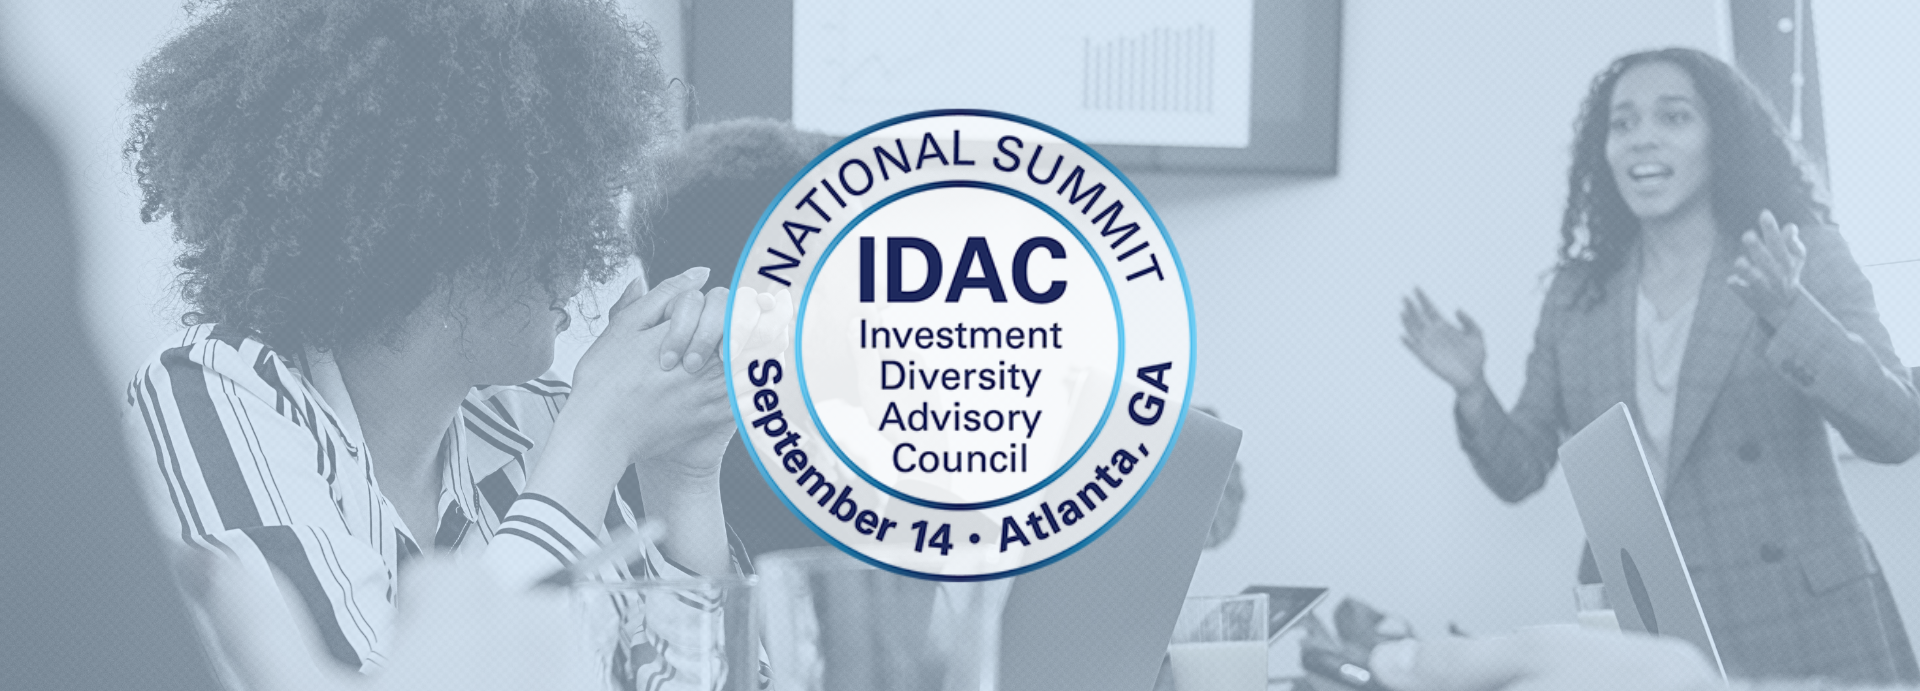 IDAC Hoping To Lead With Action At DEI Summit